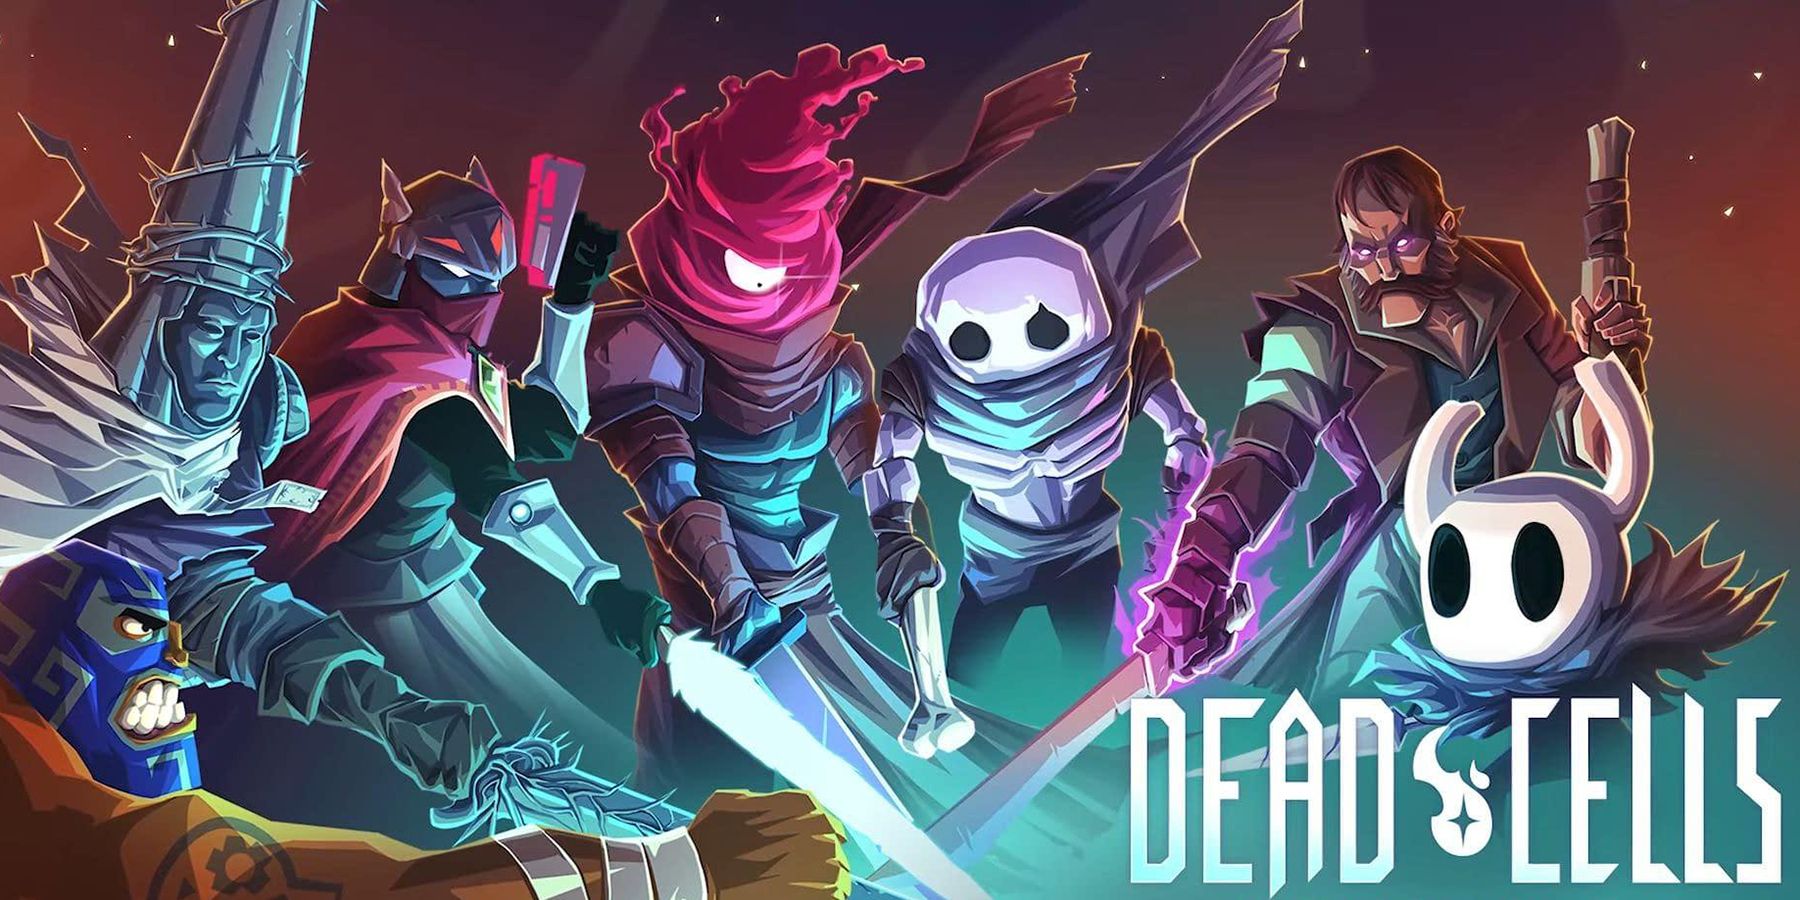 Did you know THIS about Dead Cells? #deadcells #darksouls #gitgud #gam